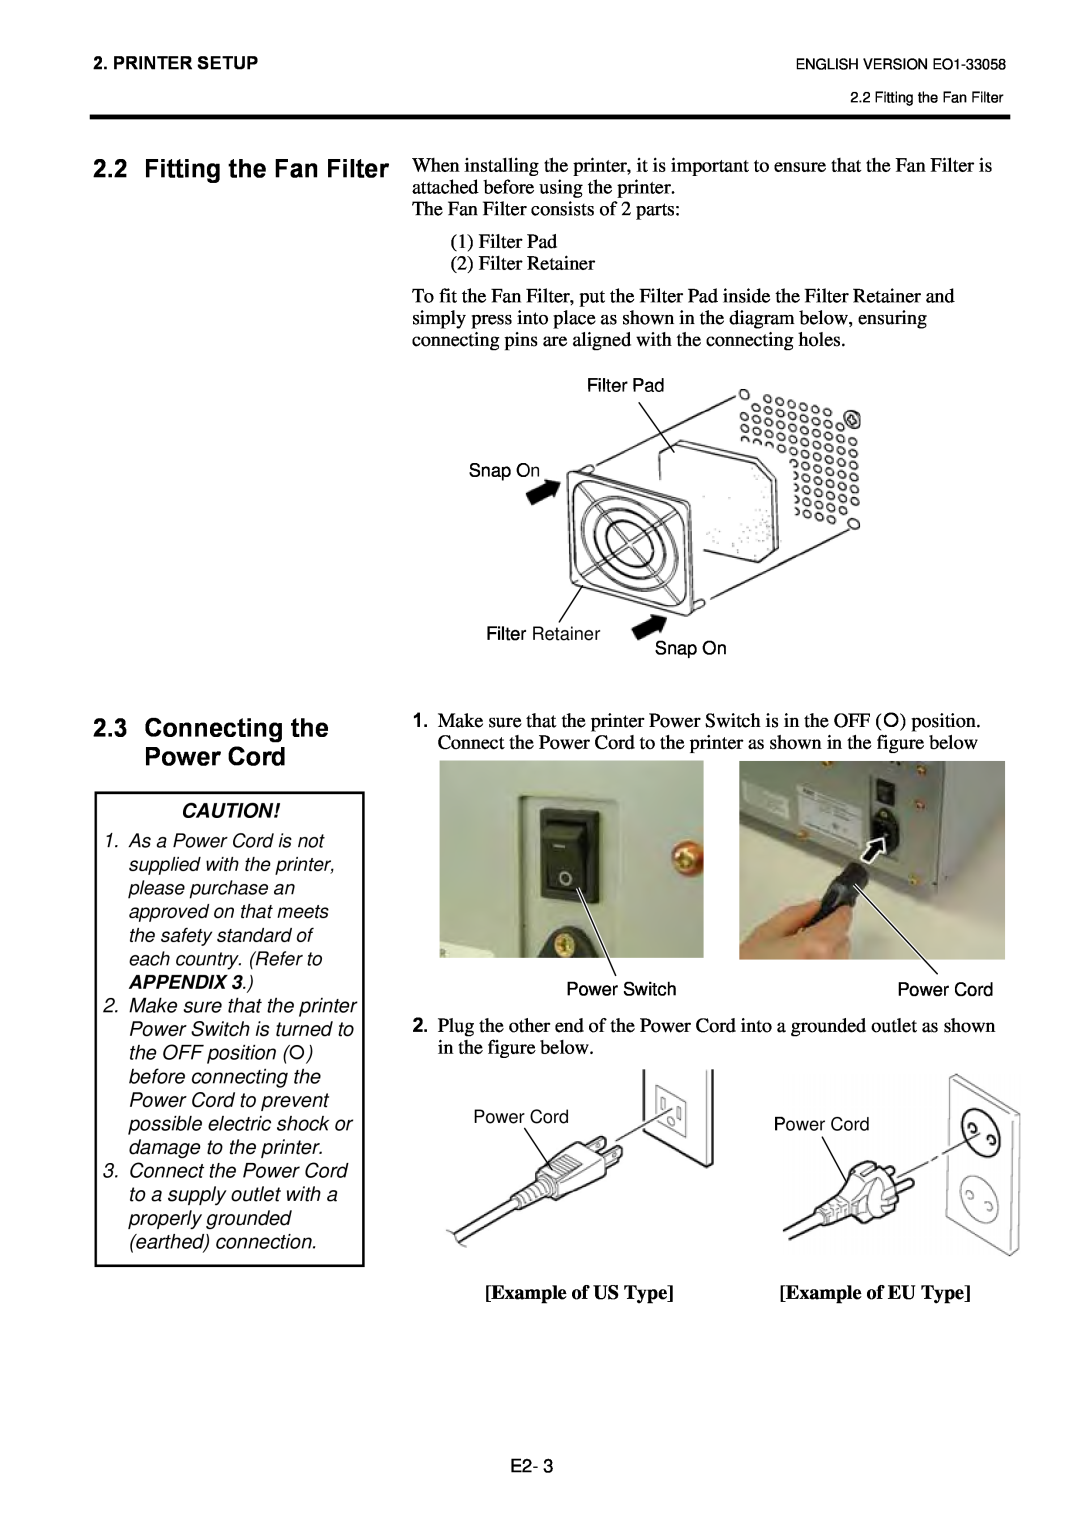 Toshiba B-SX4T owner manual Fitting the Fan Filter, Connecting the Power Cord, Example of US Type 